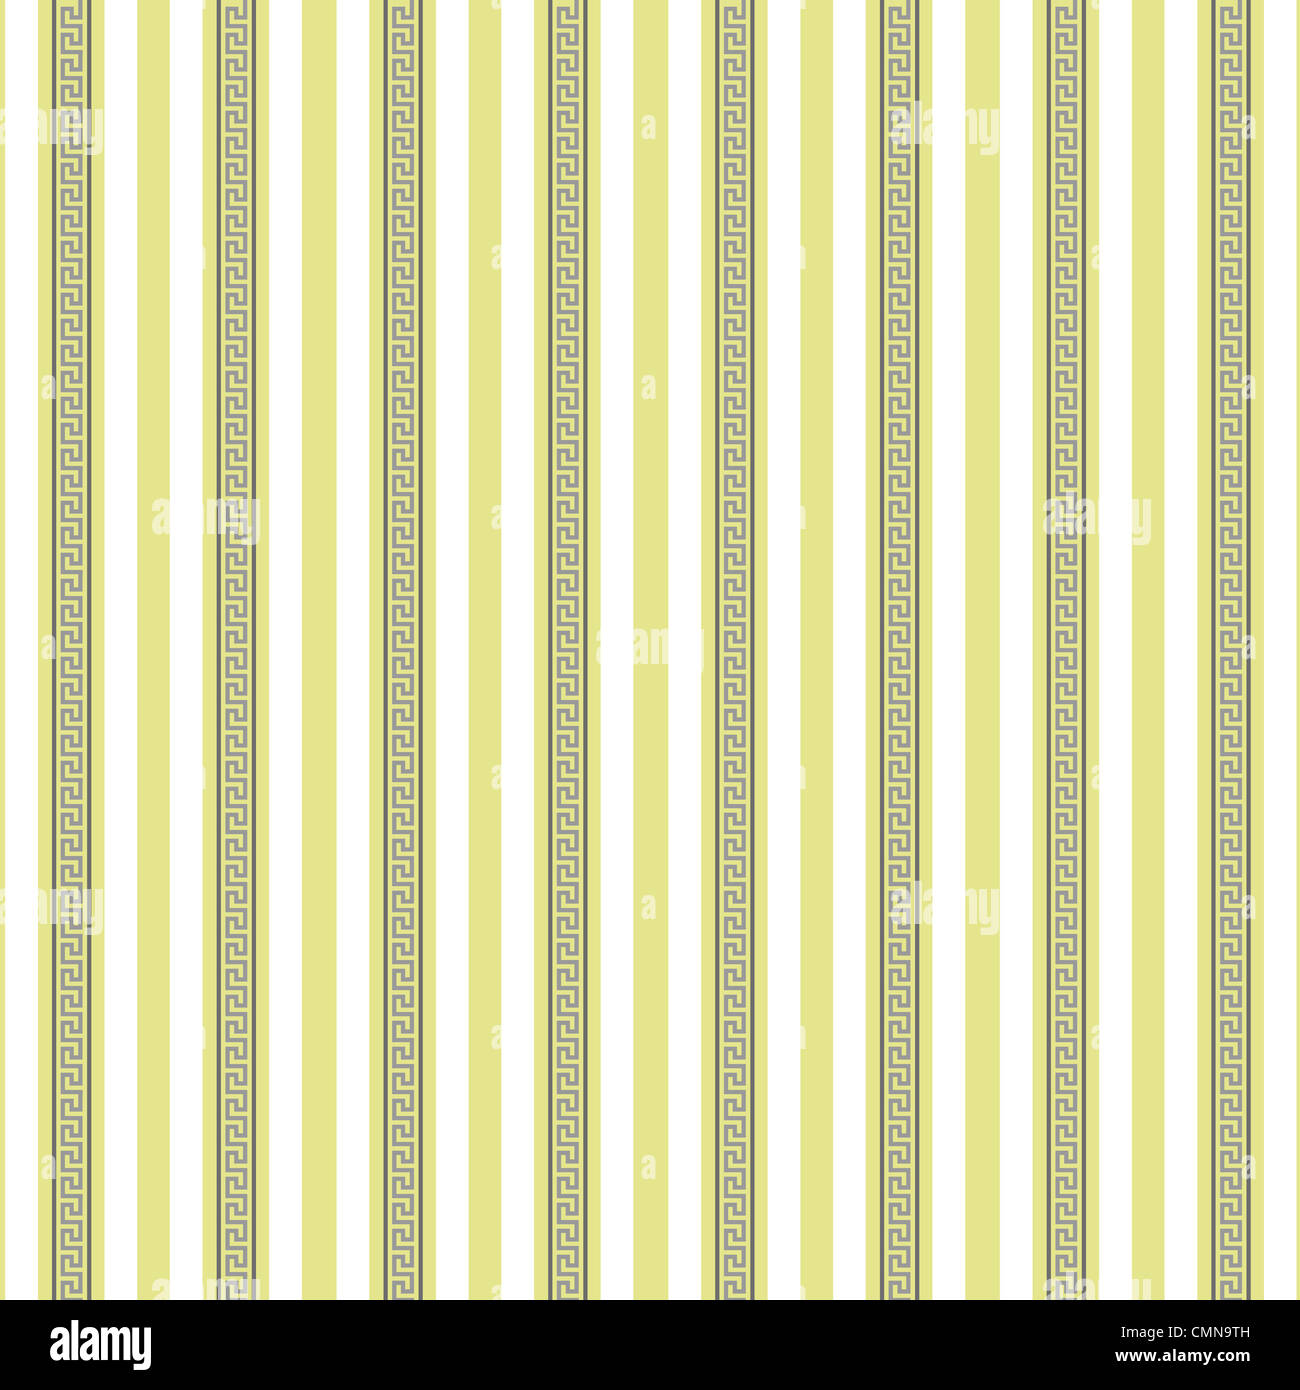 Artistic vertical stripes pattern in green and white Stock Photo